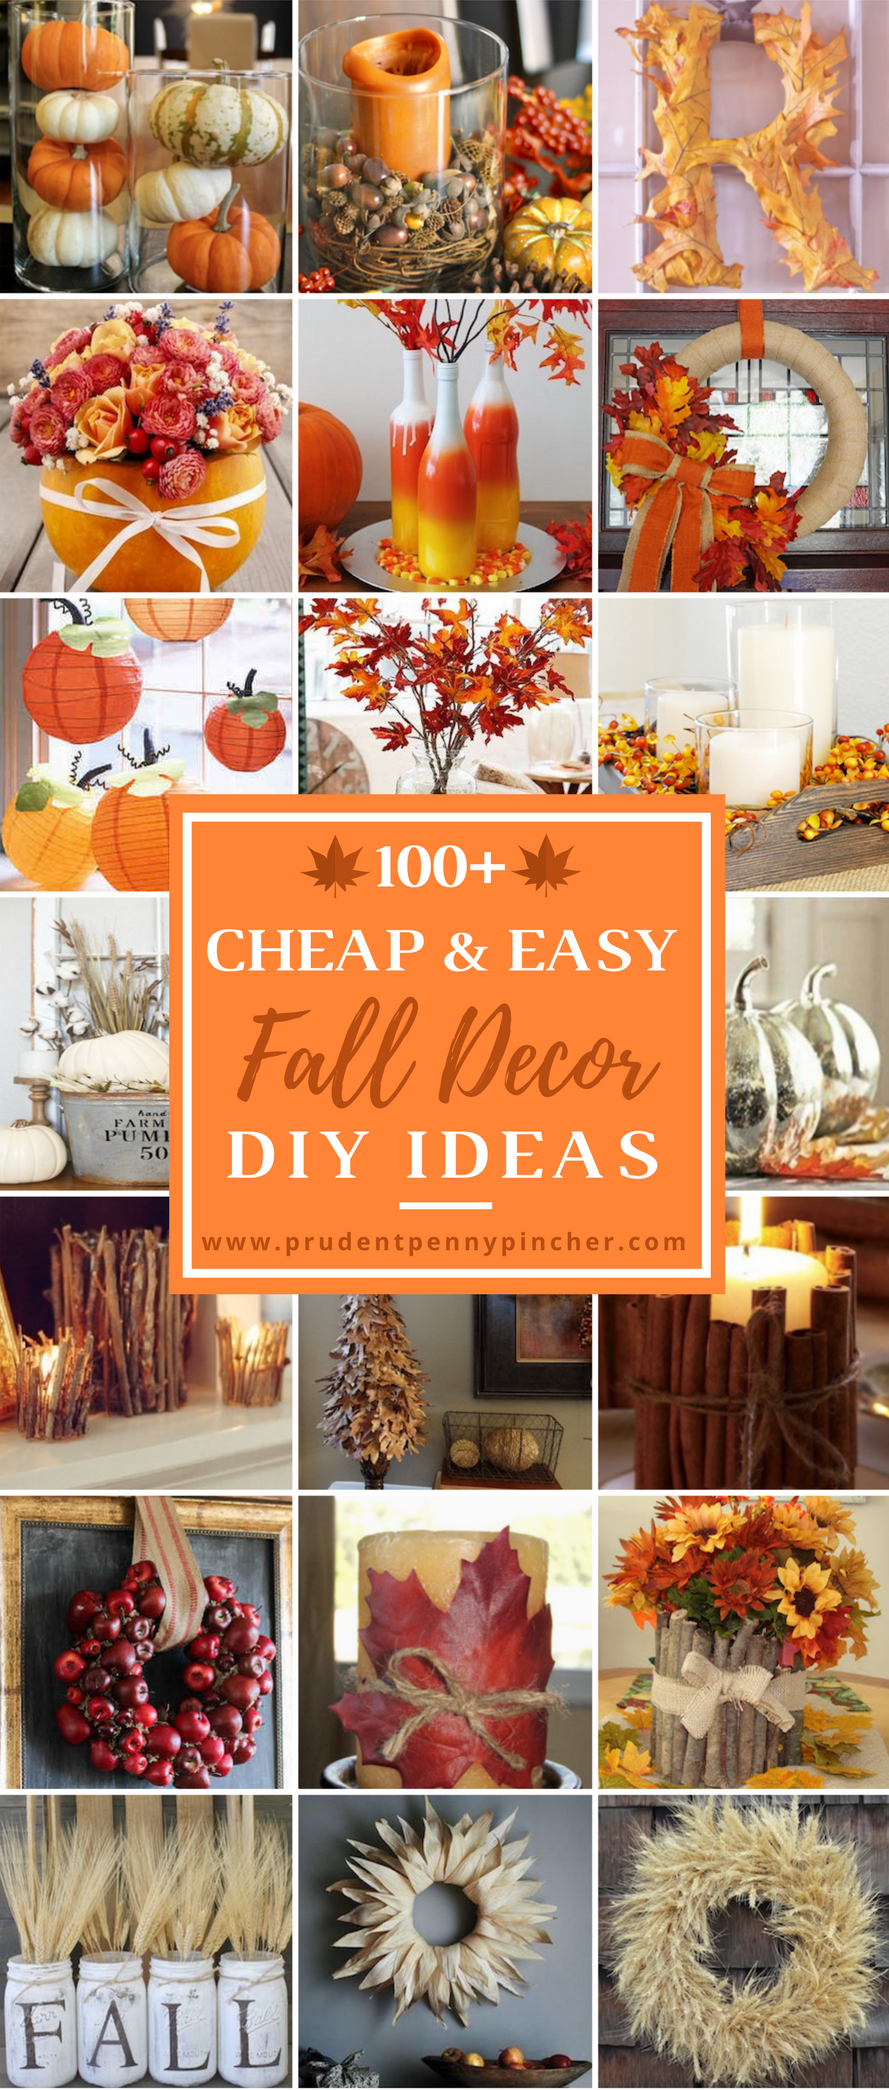 100 Cheap and Easy Fall Decor DIY Ideas - Prudent Penny Pincher